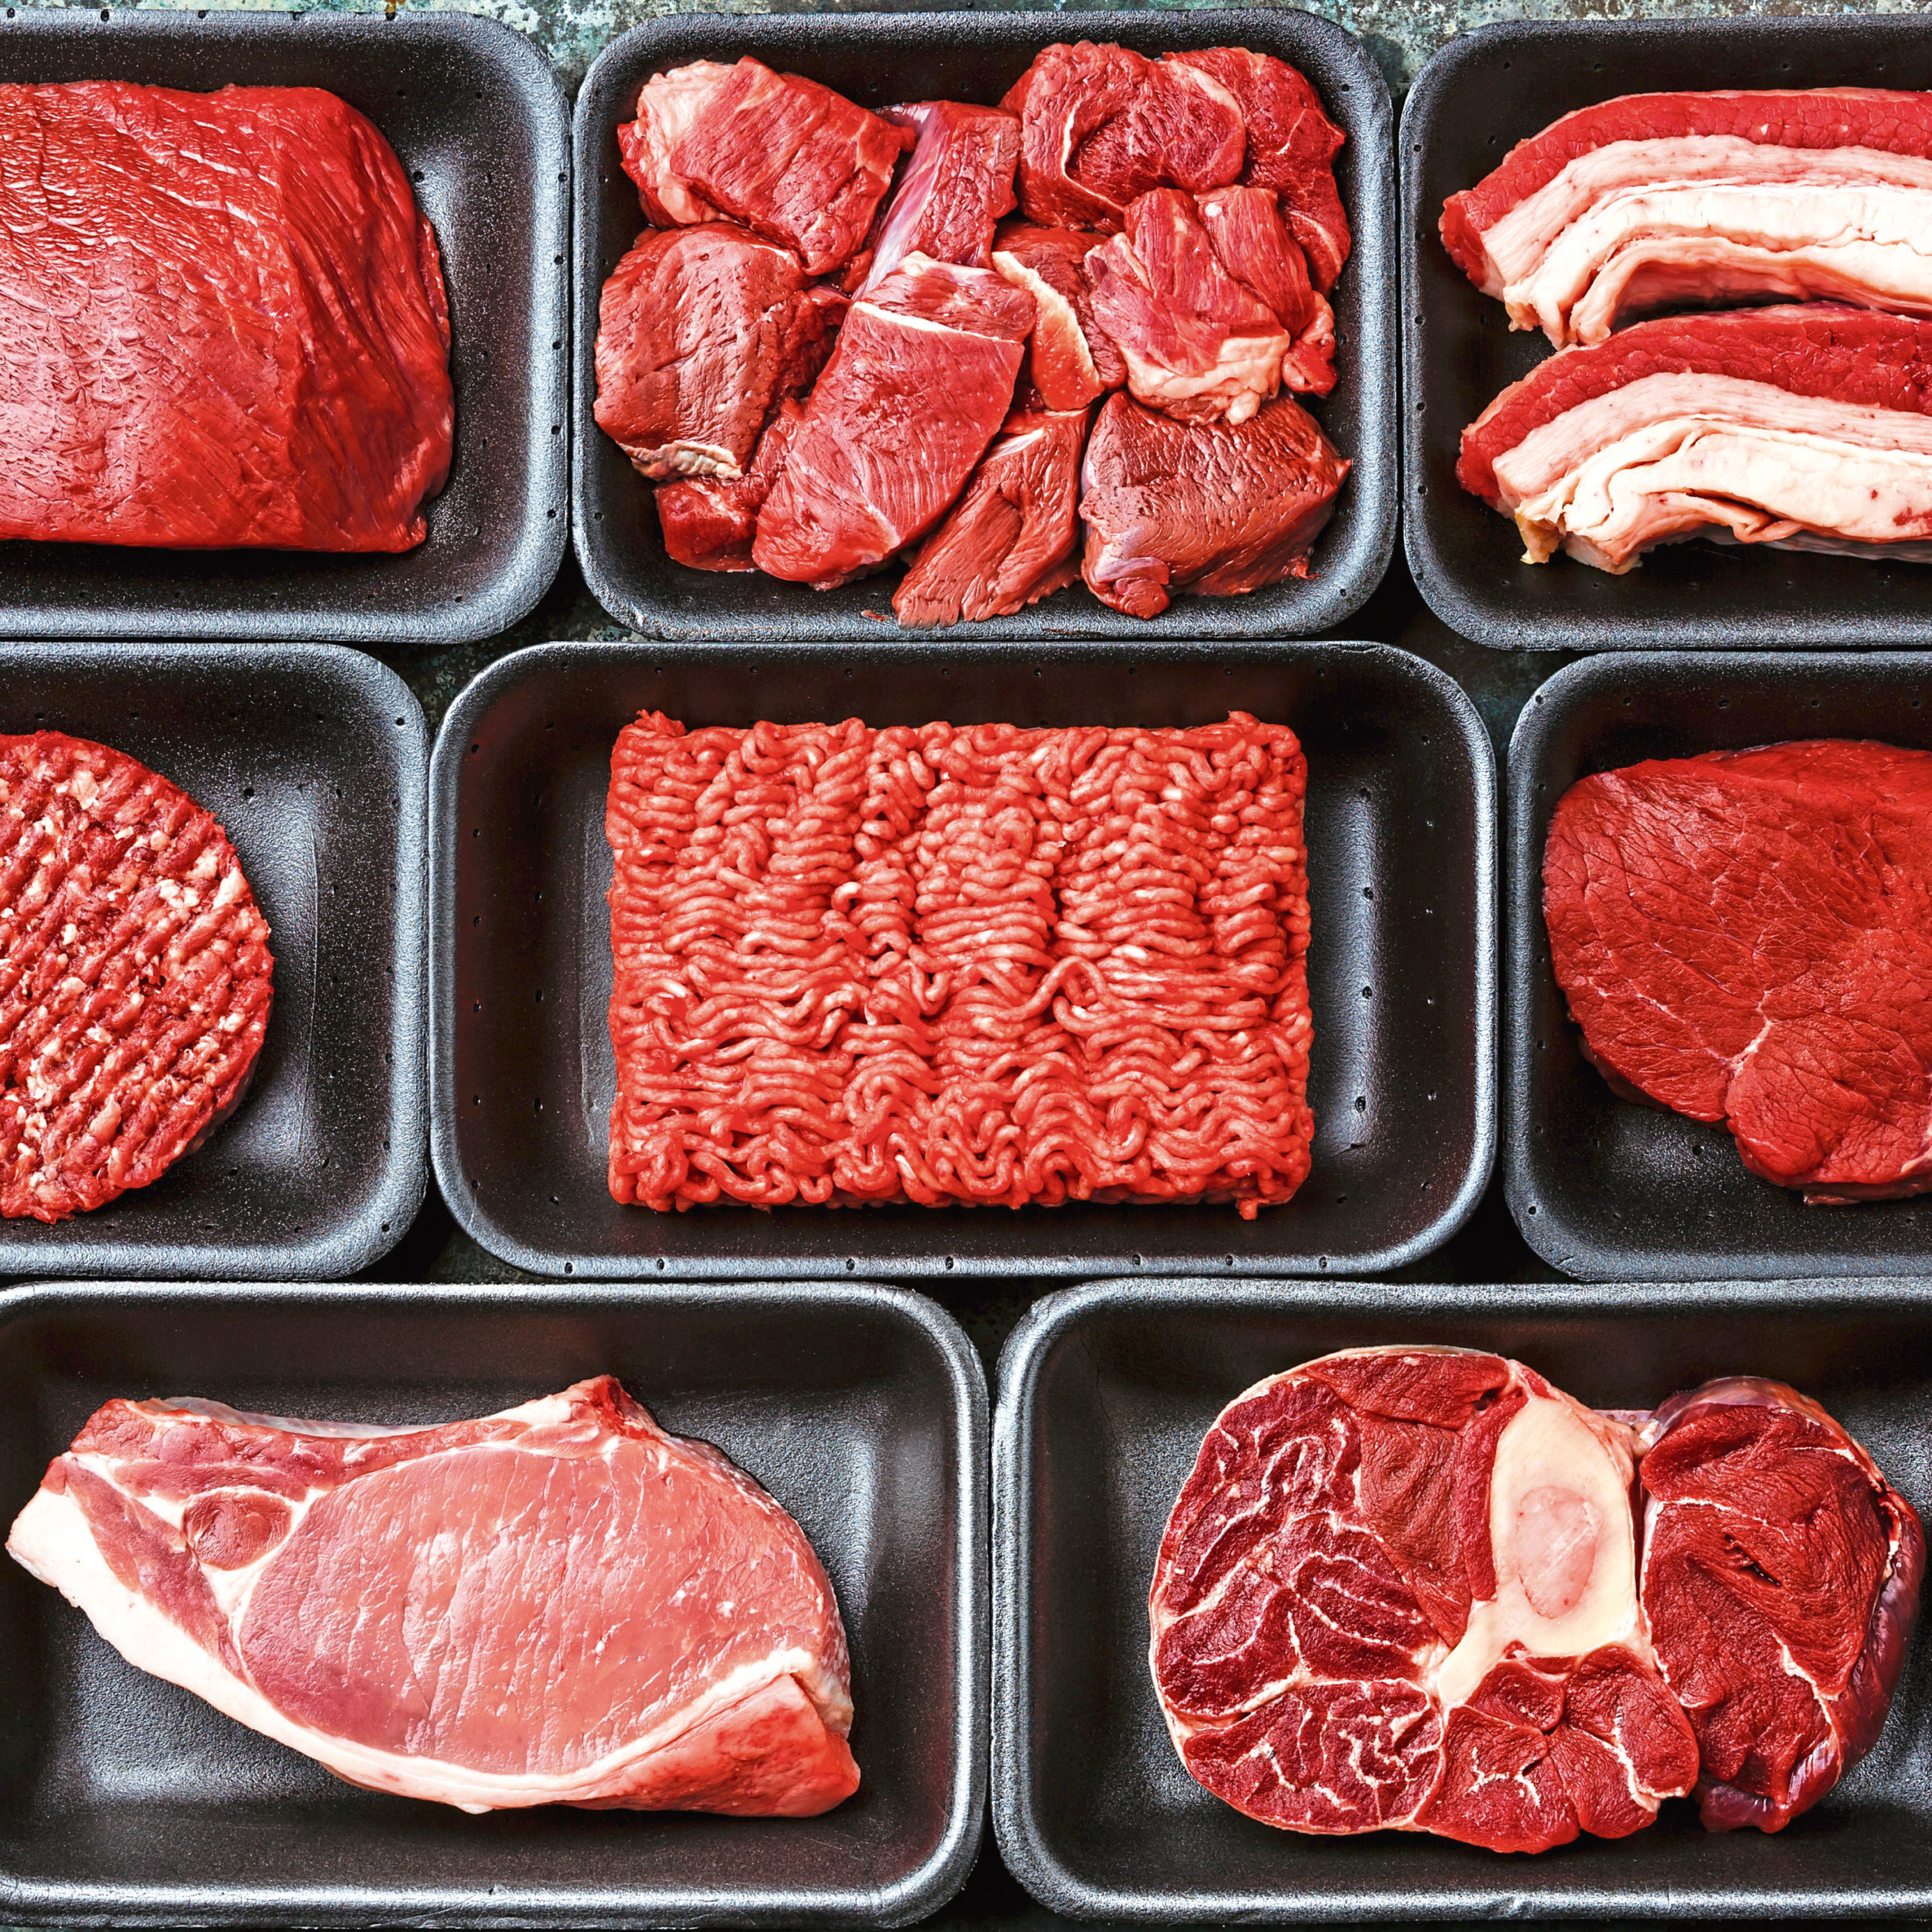 AHDB says it successfully challenged claims about red meat made by the BBC and Quorn.